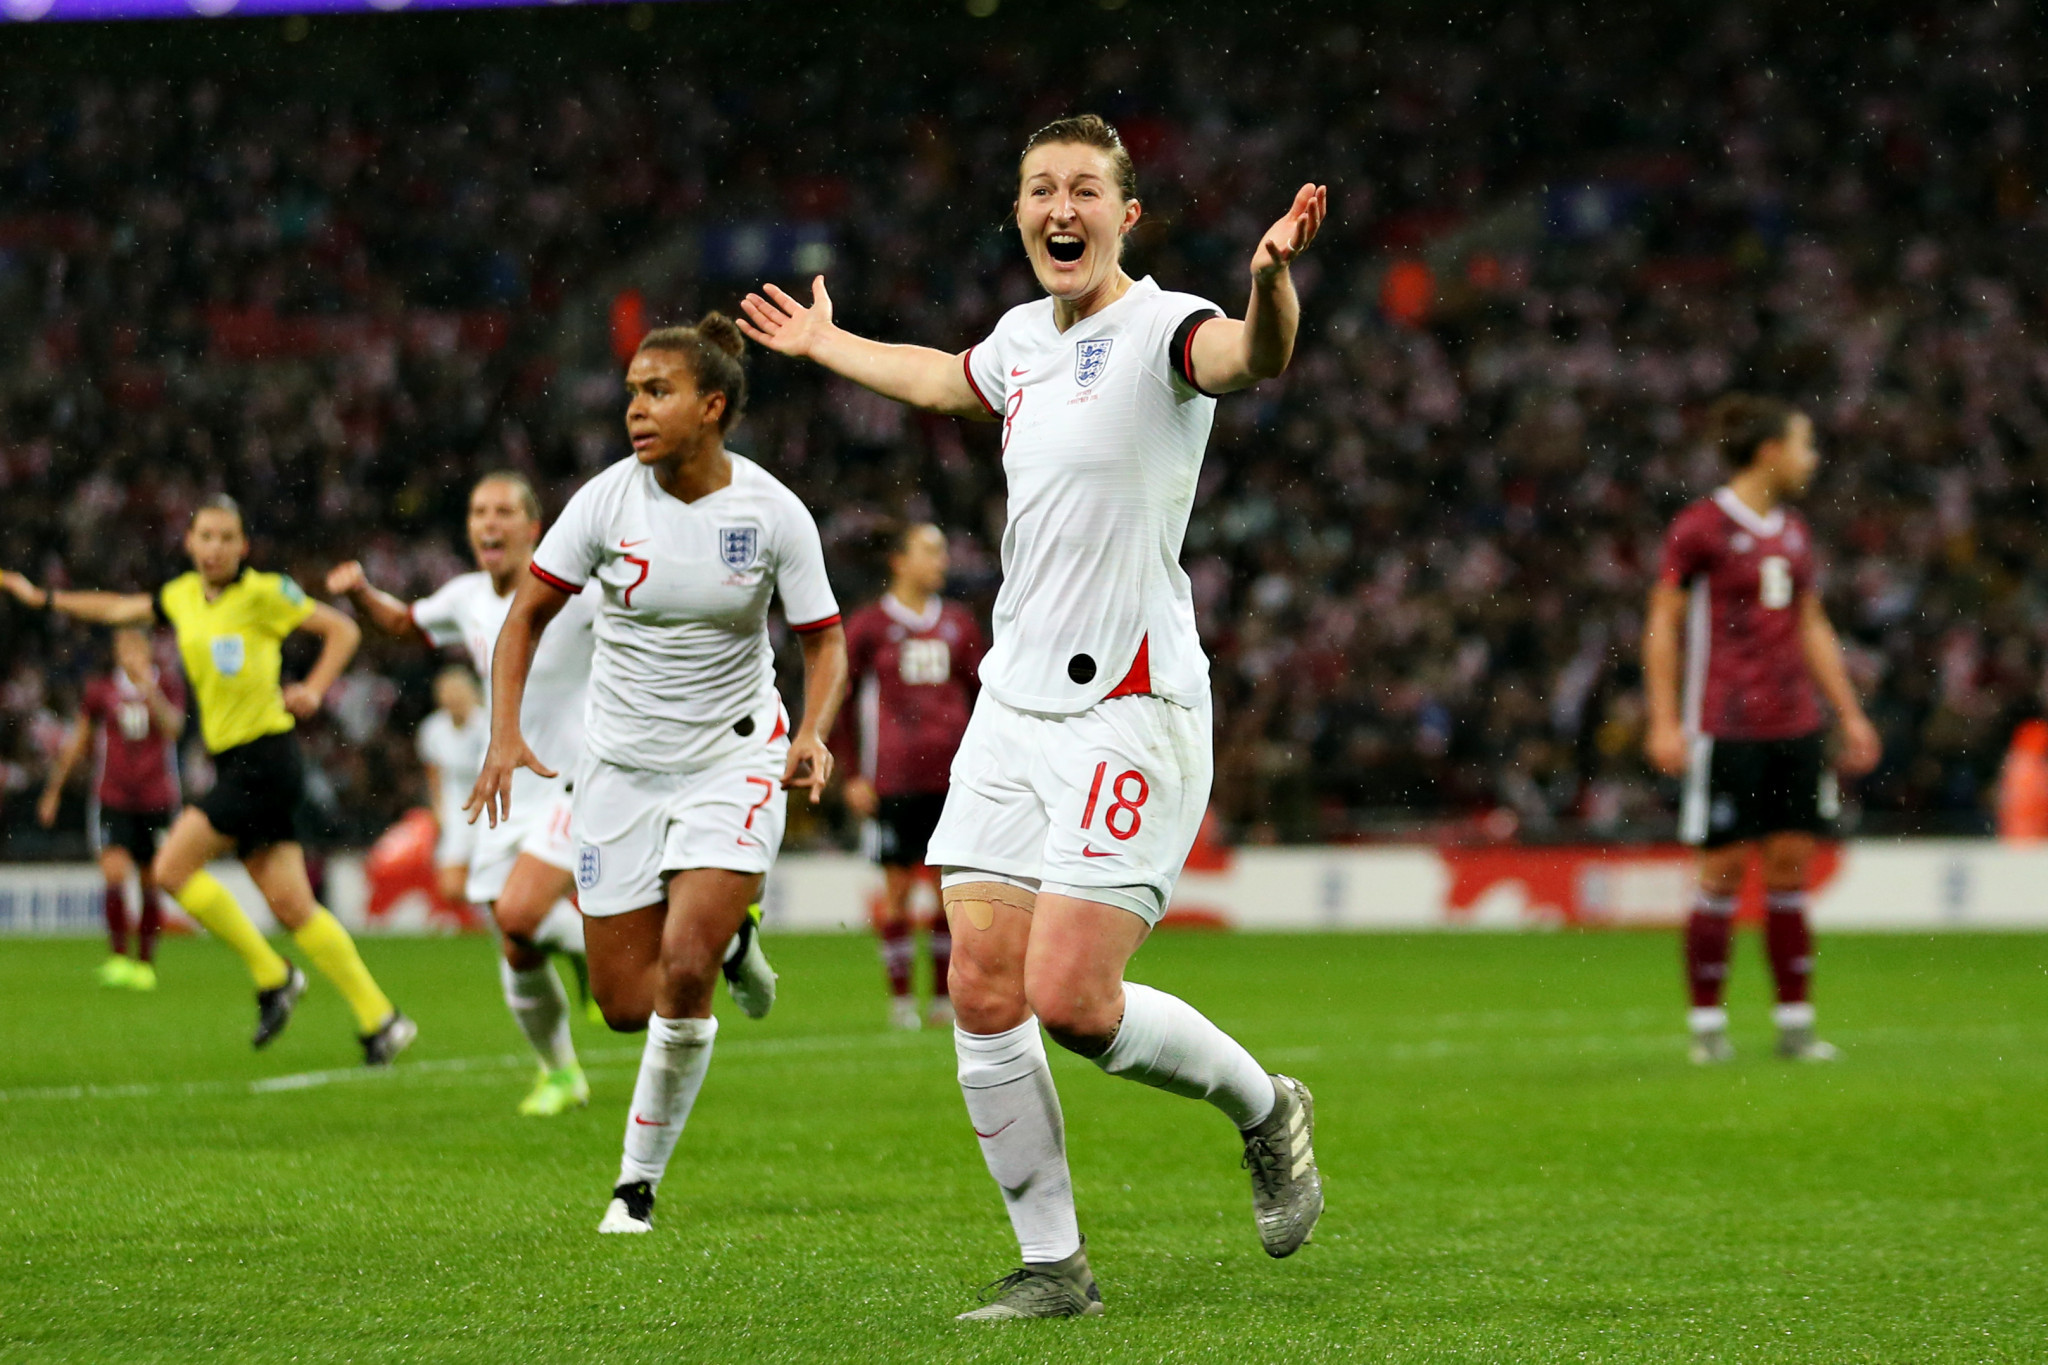 The English Football Association confirmed England women's is to be paid the same rate as their male counterparts ©Getty Images